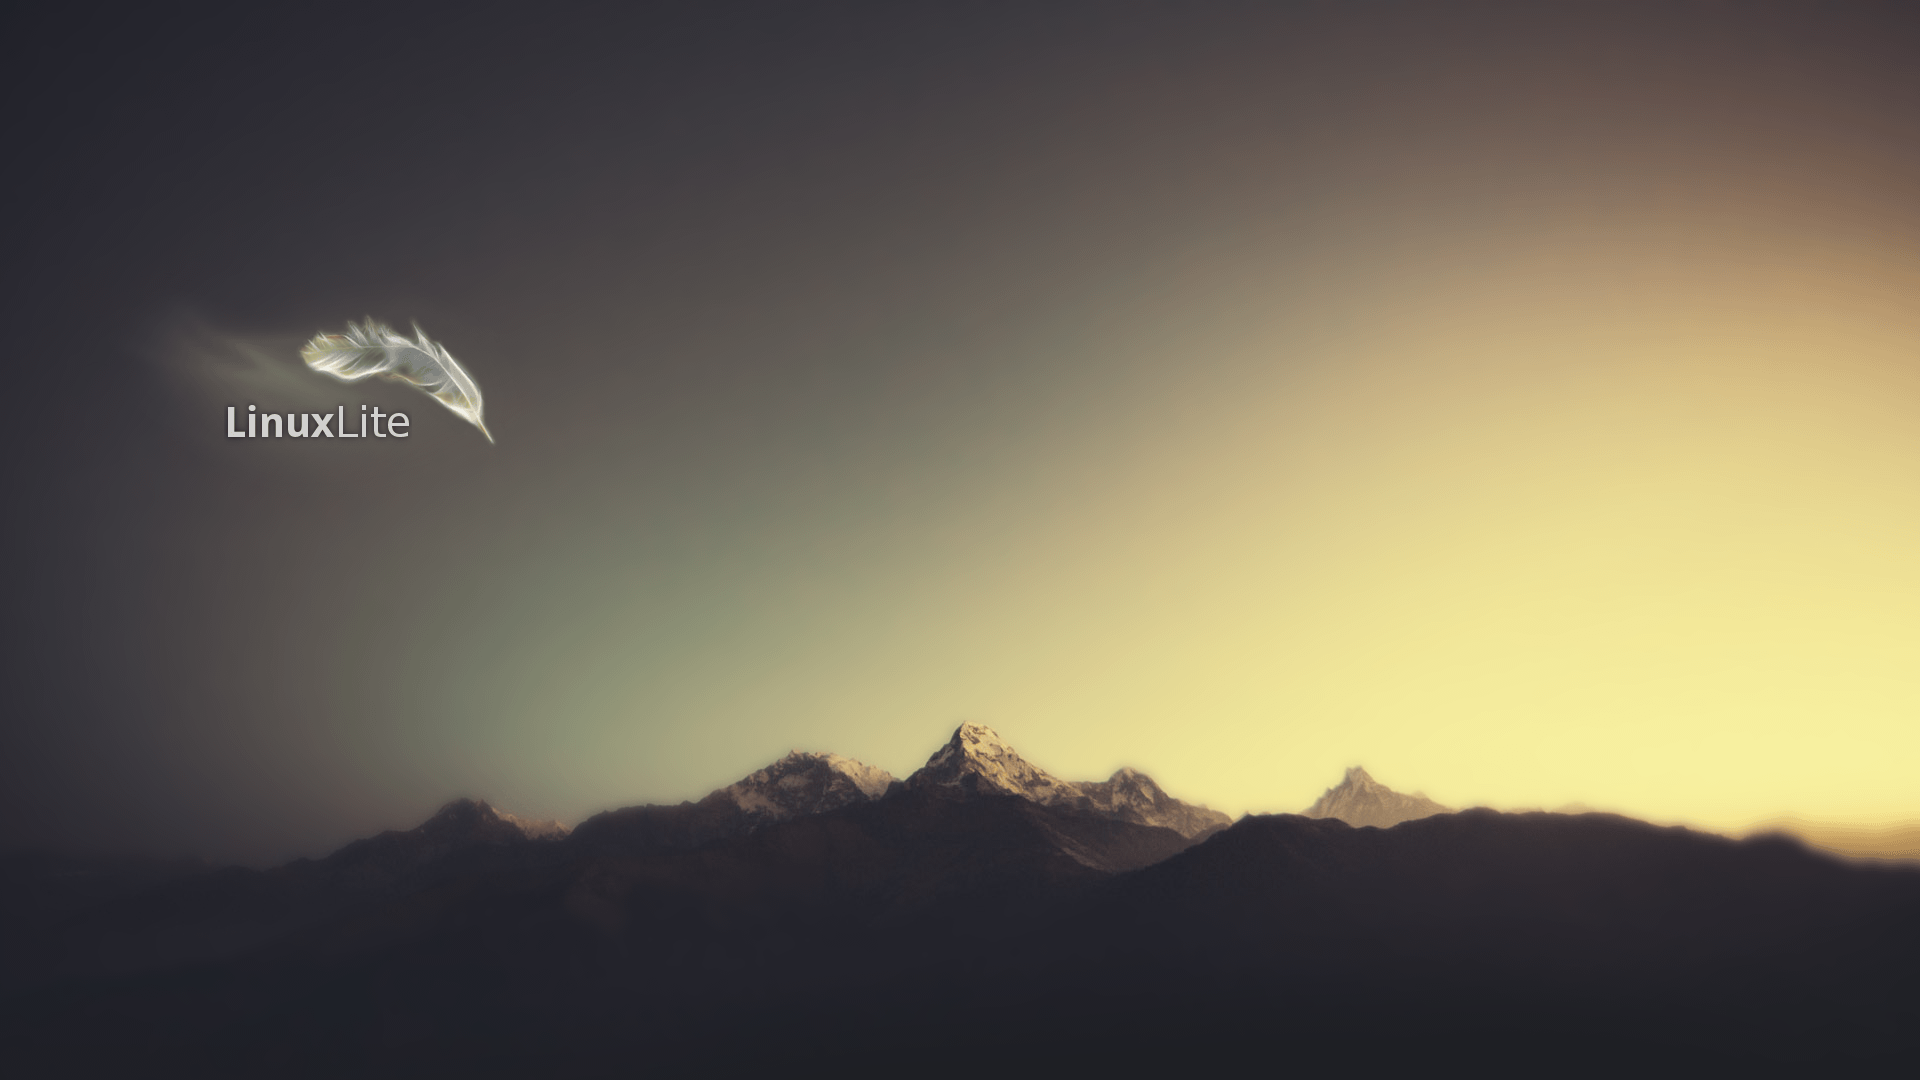 Linux Lite contributed artwork and wallpaper here - and here